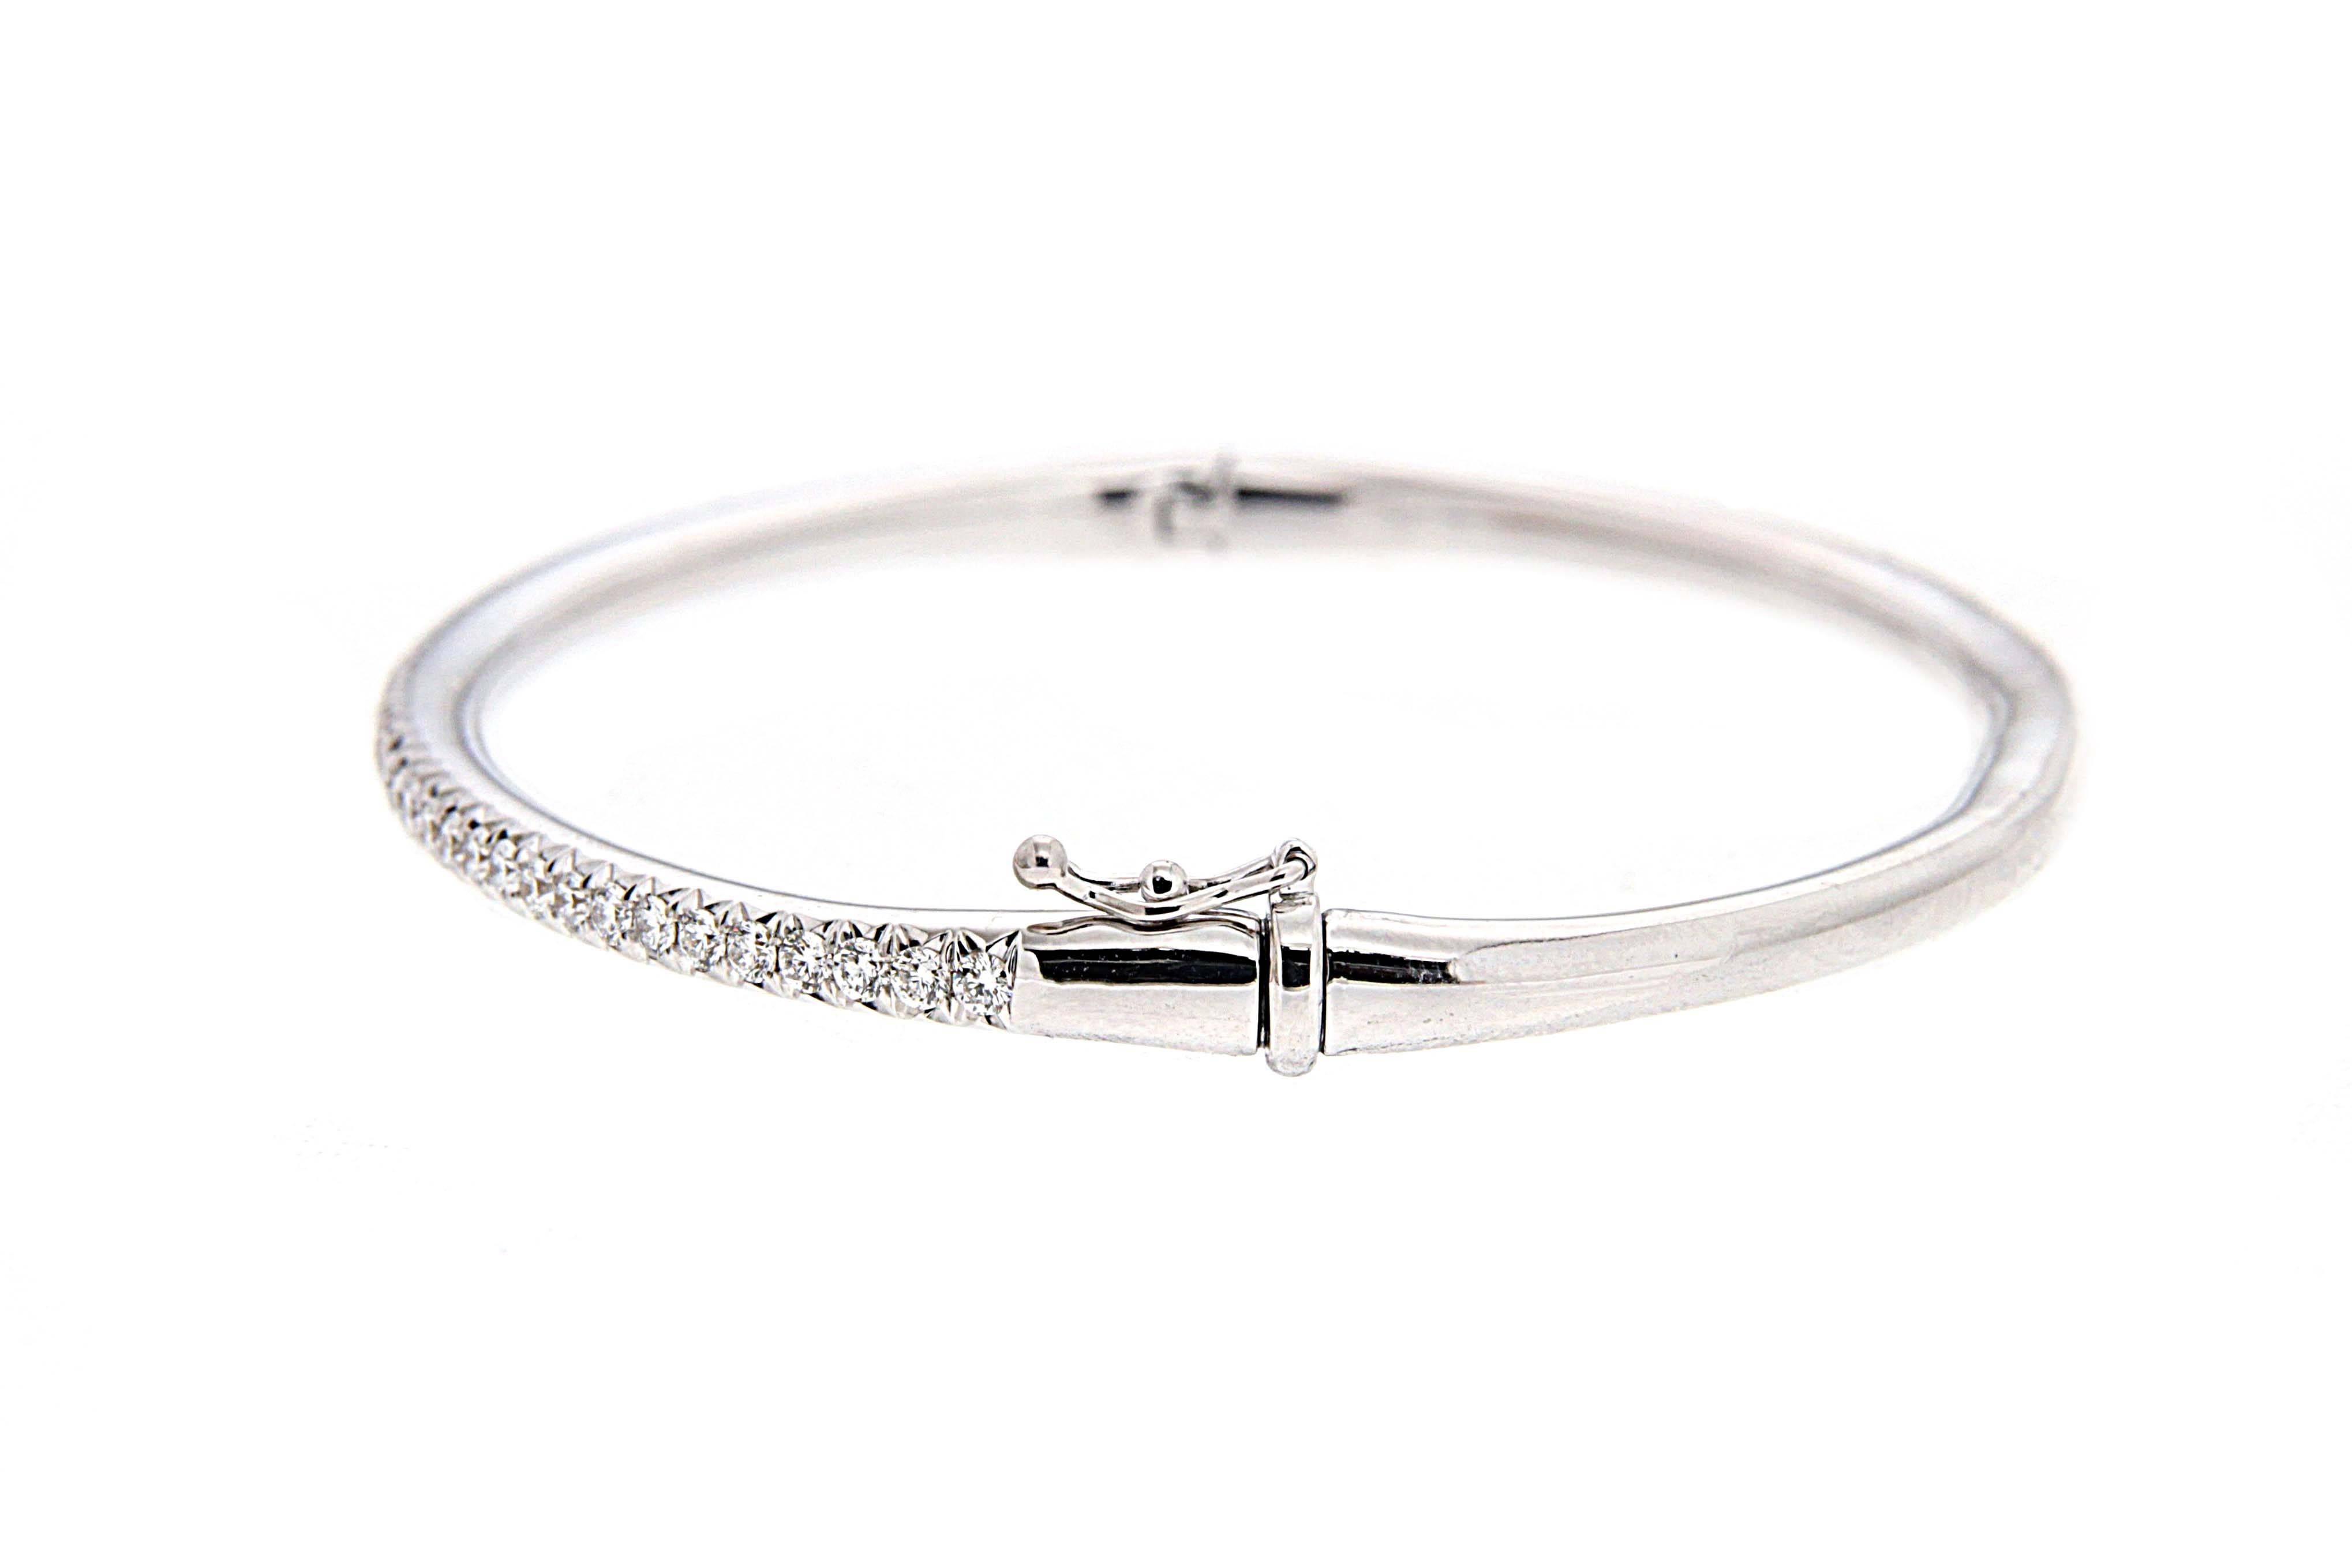 This elegant bangle features a single line of pave diamonds that goes half way around the bangle, total weight 1.08ctw in 18kt white gold. (DEF/VVS) 
The result is a unique jewel and the perfect gift for any occasion.